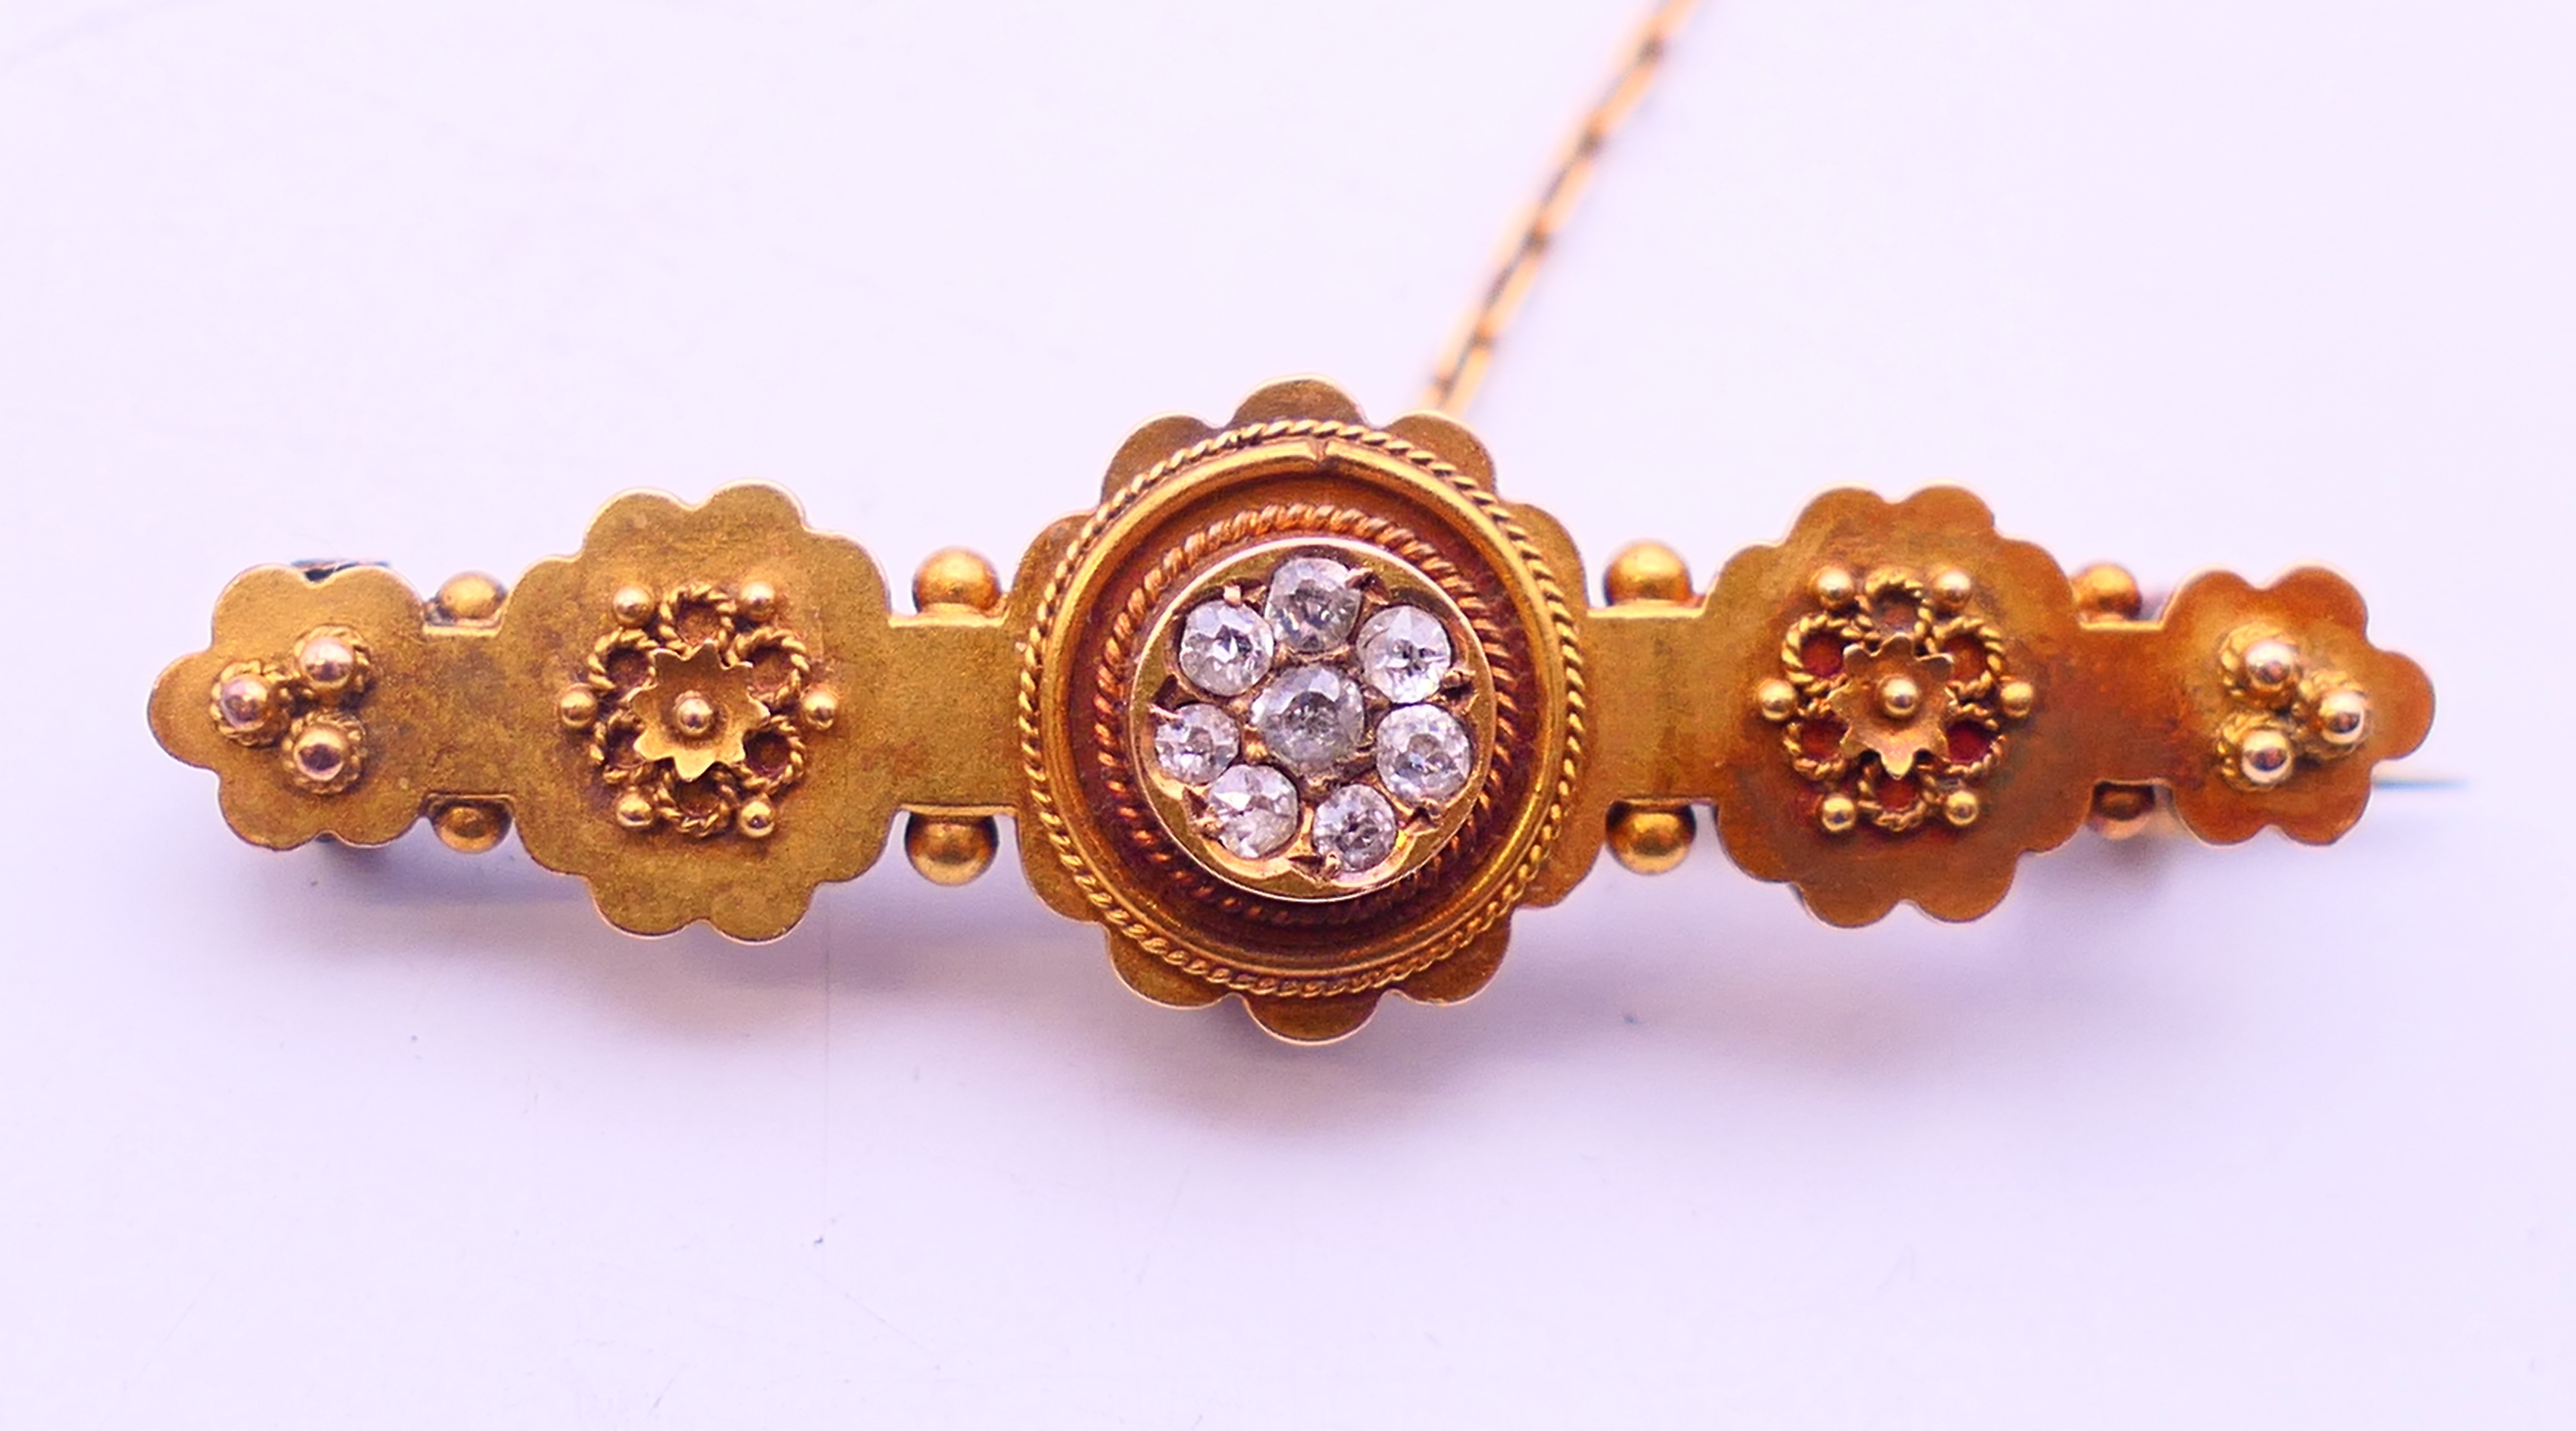 A 15 ct gold and diamond brooch. 4 cm long. 3 grammes total weight.